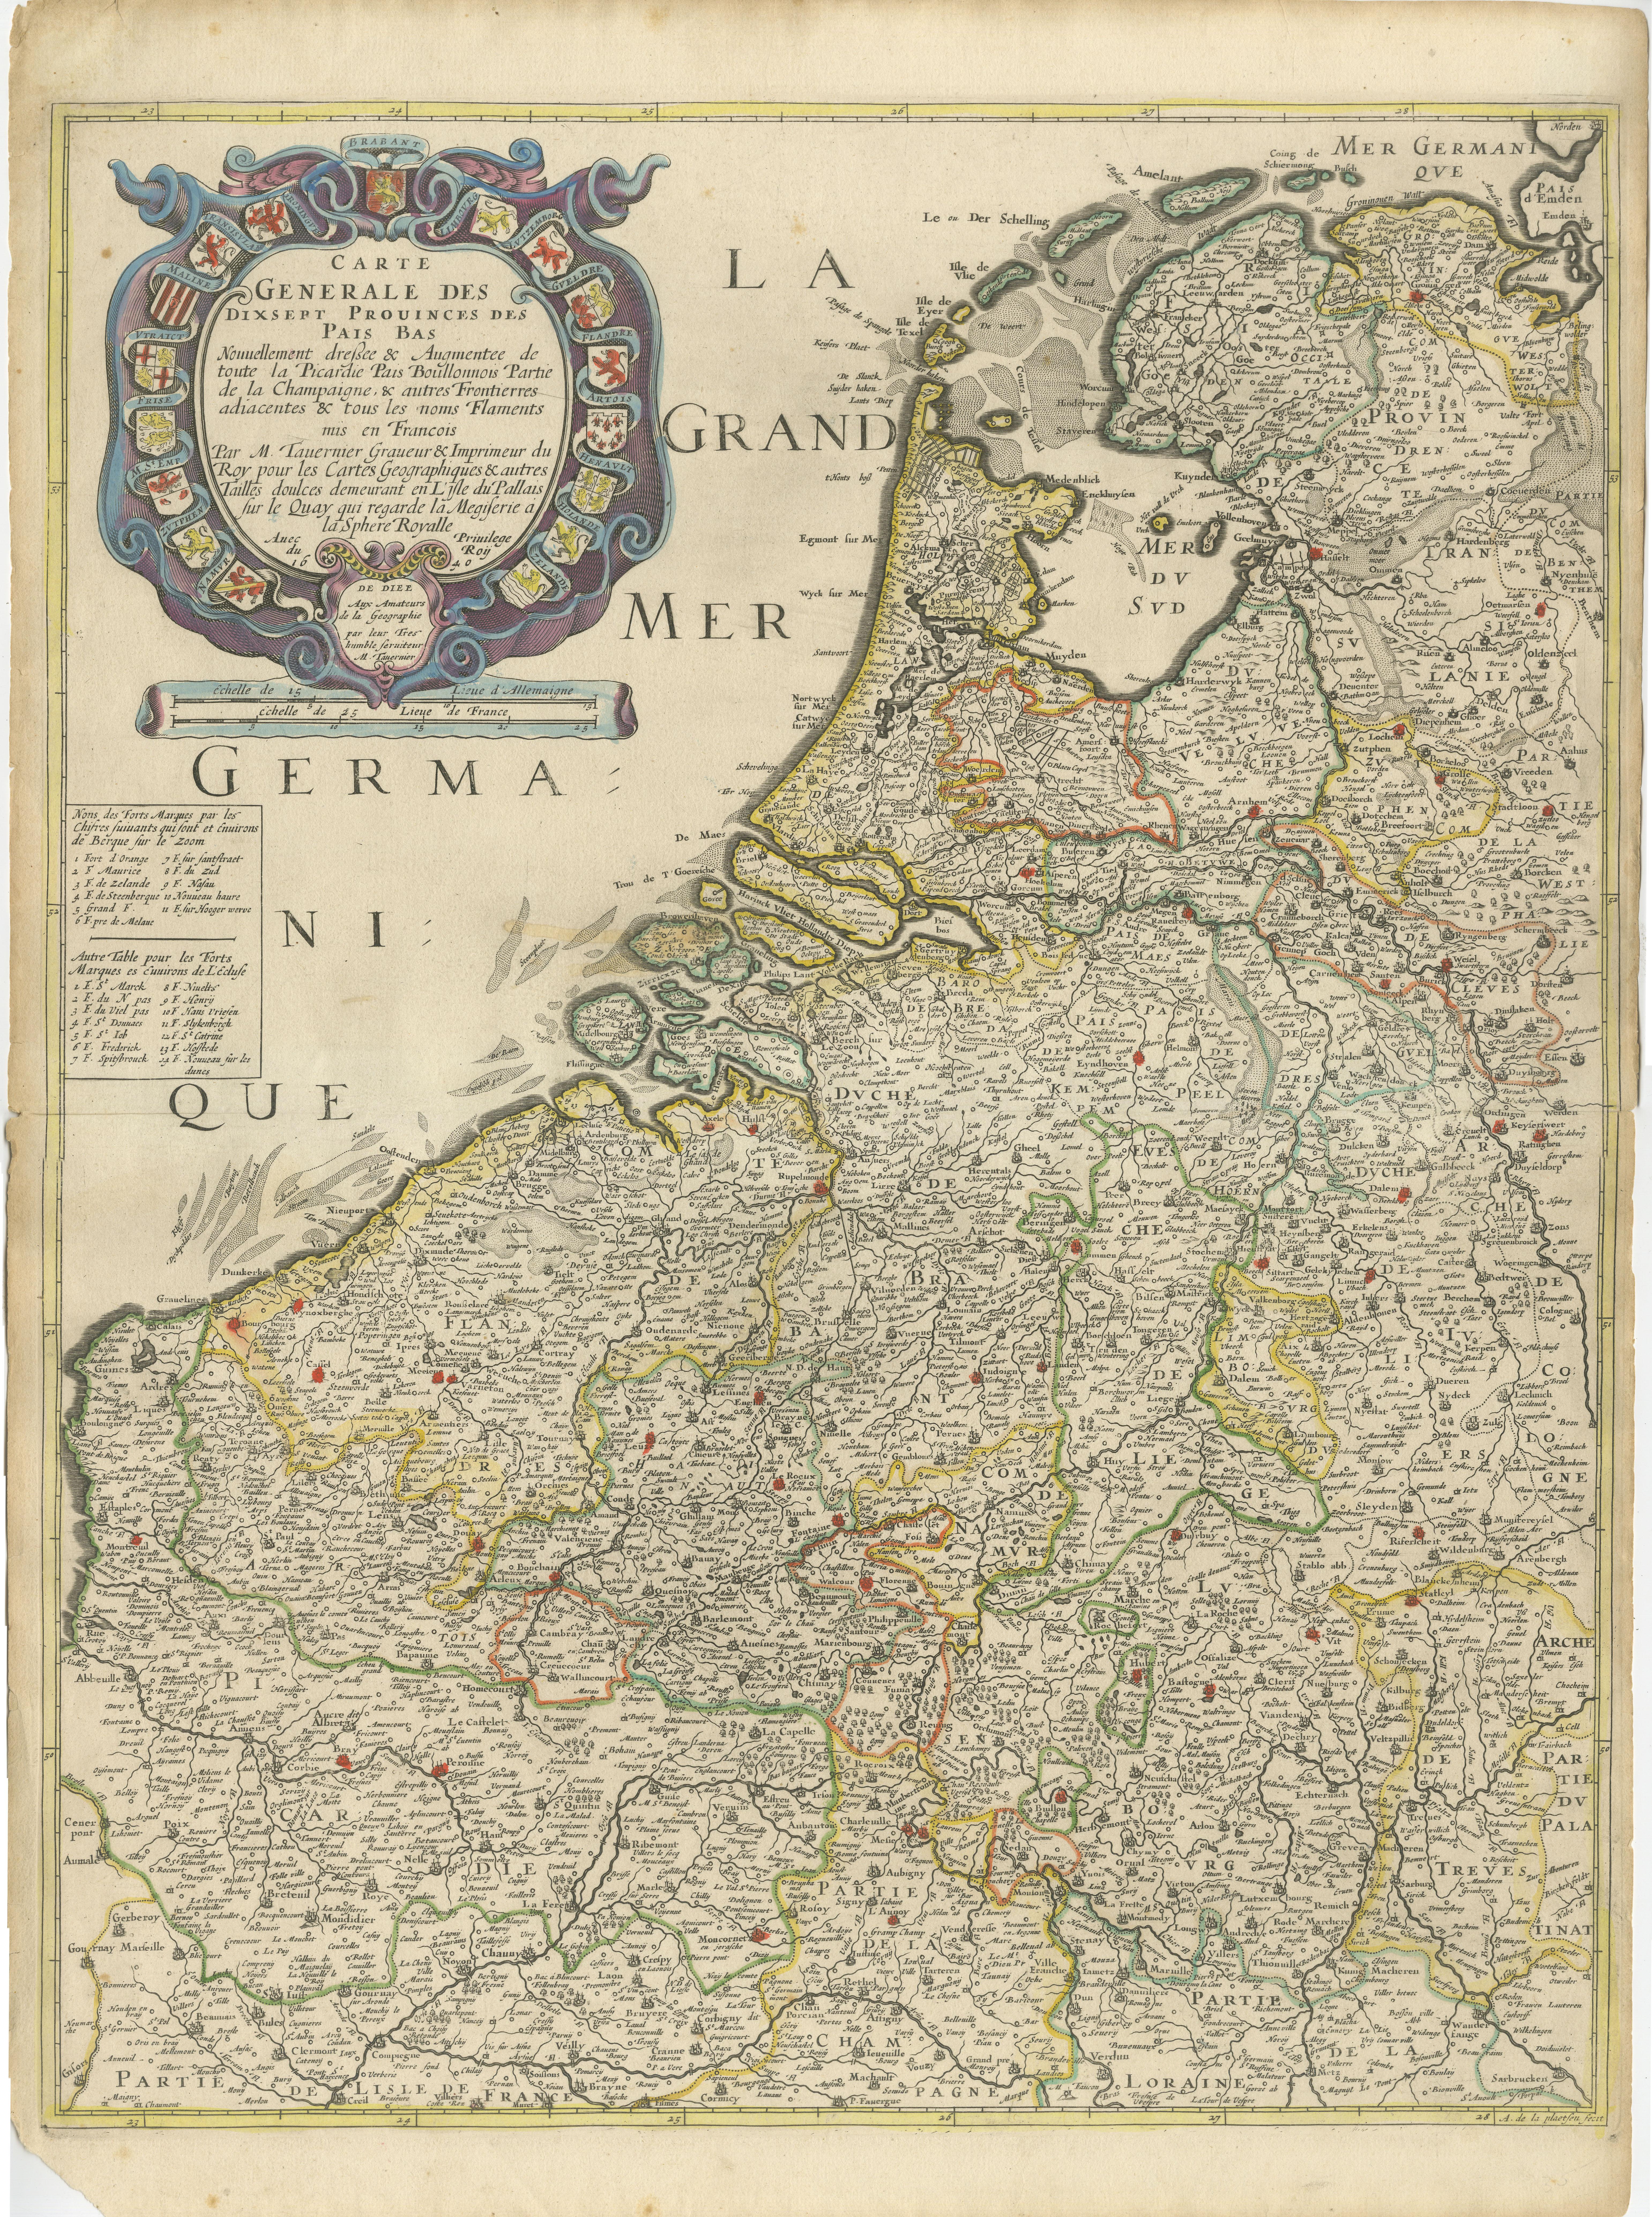 Antique map titled 'Carte Generale des Dixsept Provinces des Pais Bas'. Rare and Early map of the Seventeen Provinces. The Seventeen Provinces were the Imperial states of the Habsburg Netherlands in the 16th century. They roughly covered the Low